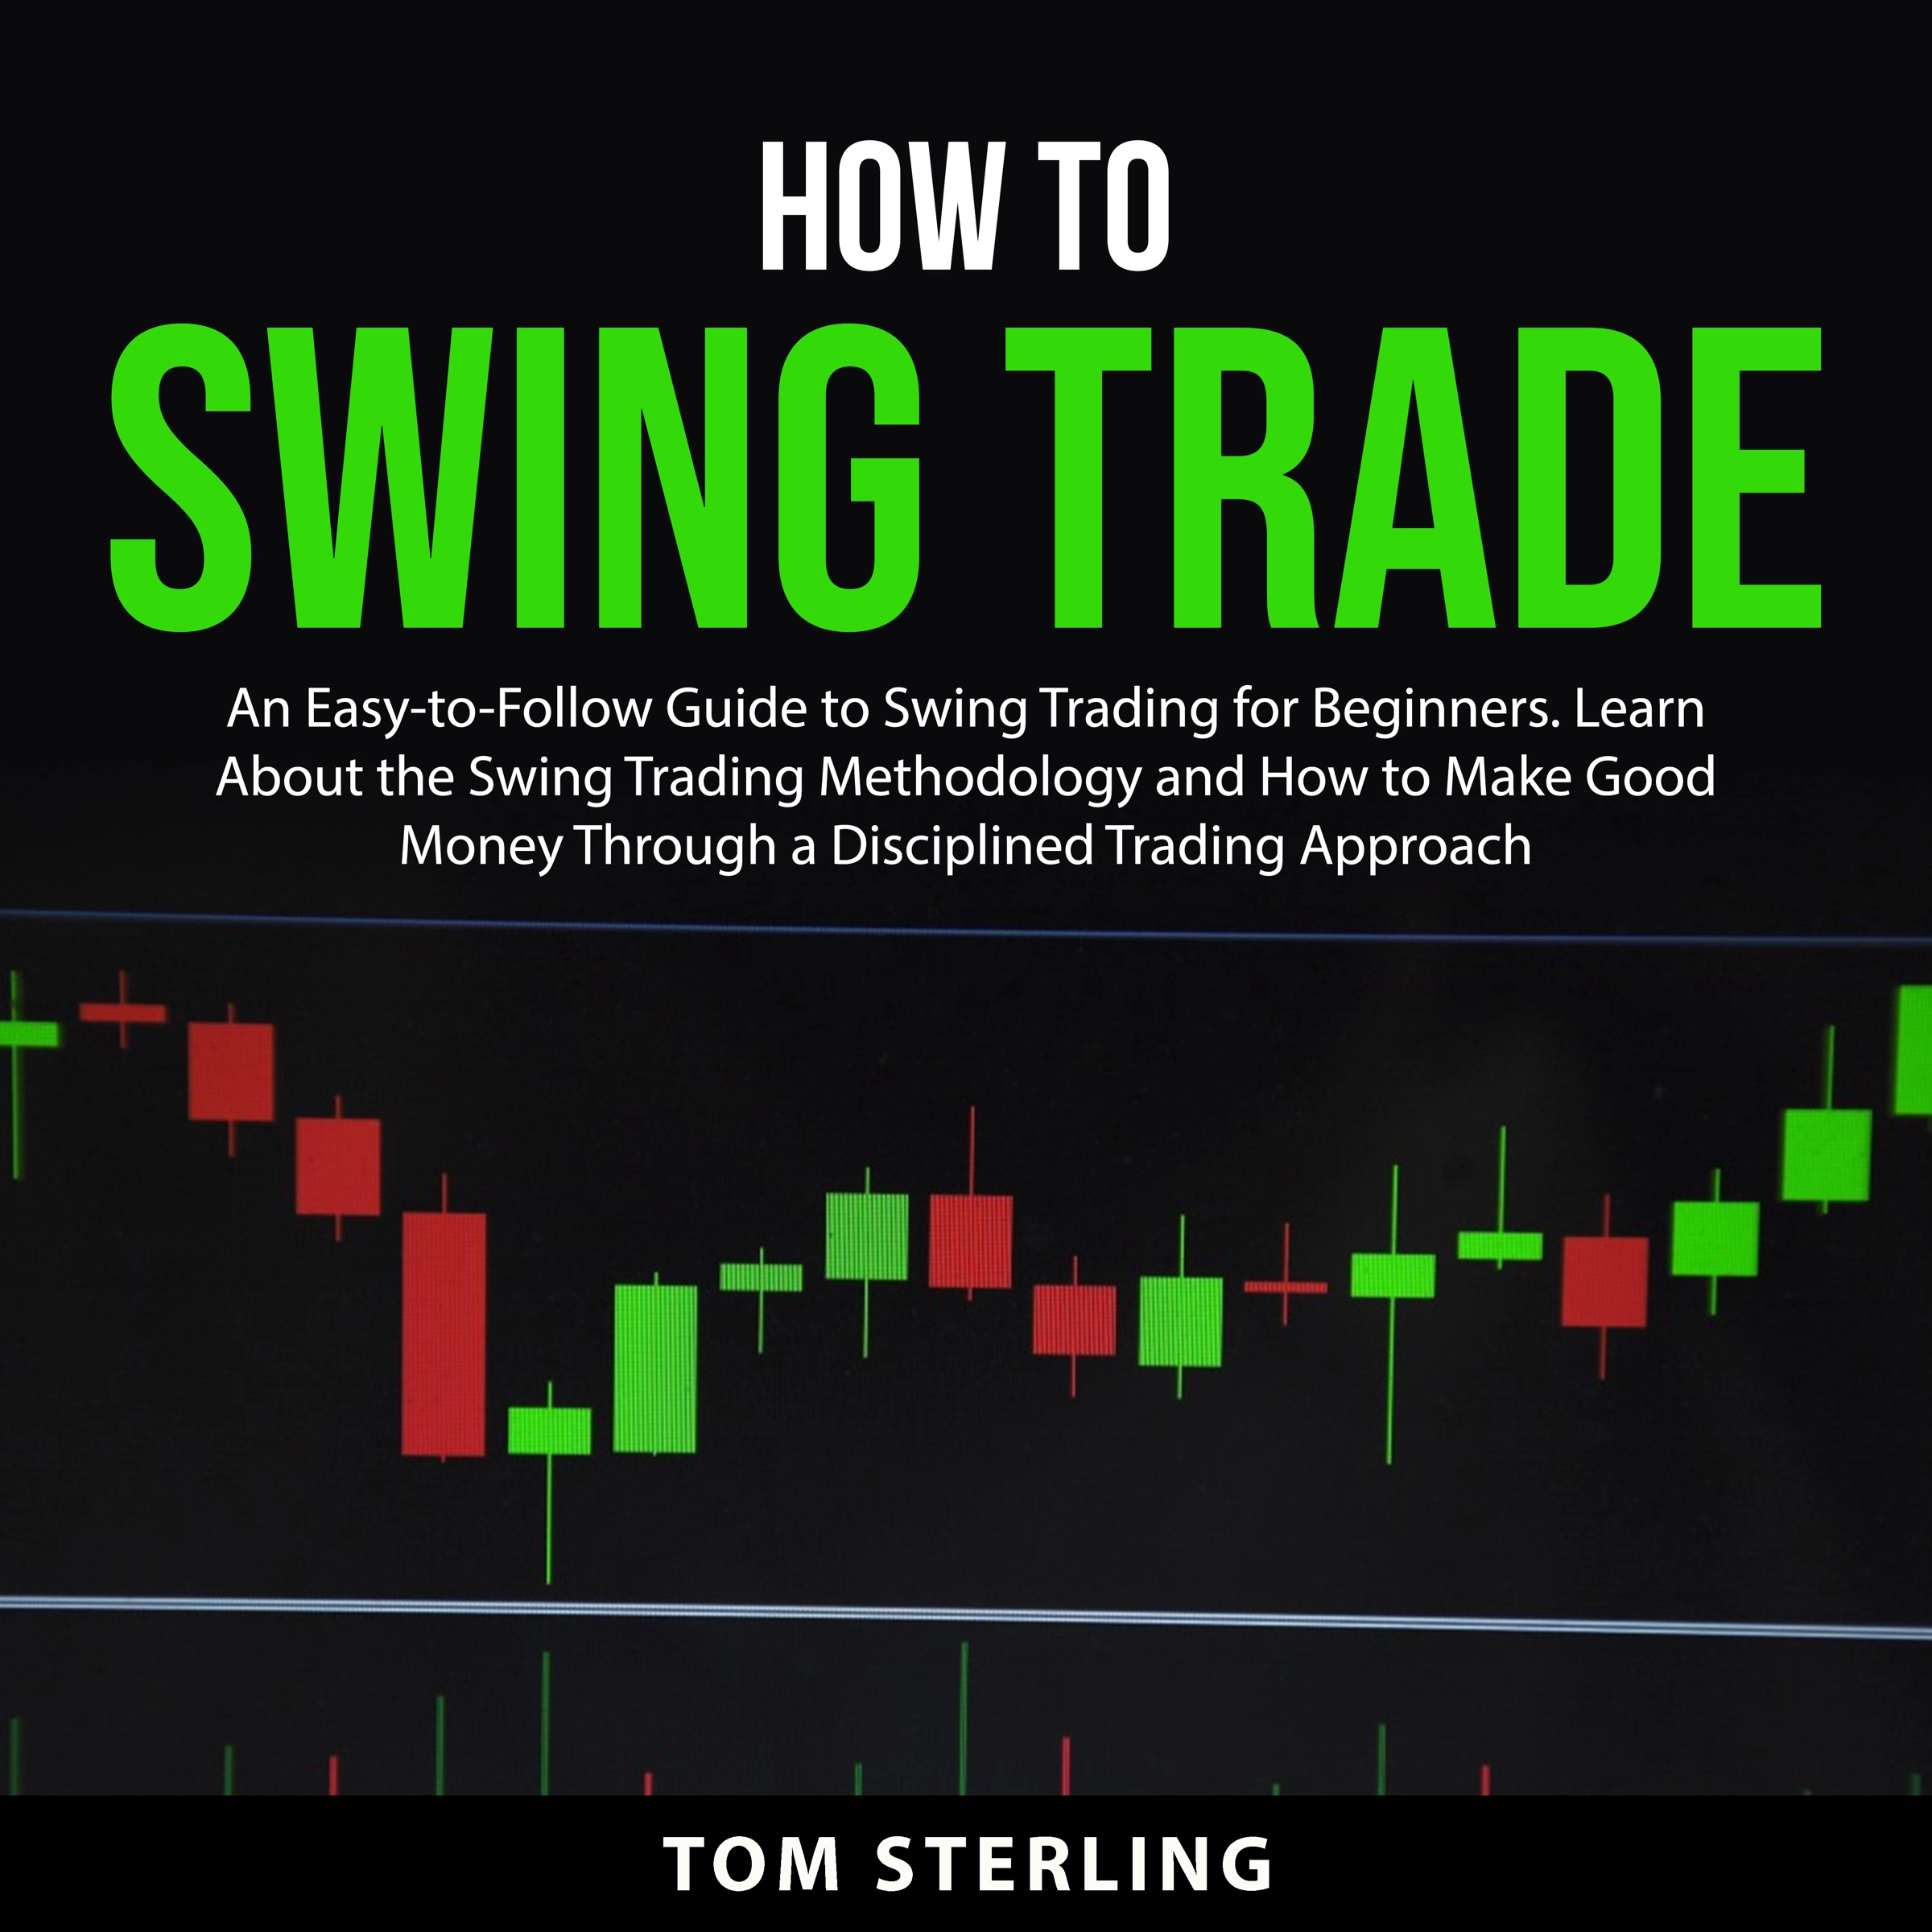 How To Swing Trade by Tom Sterling Audiobook